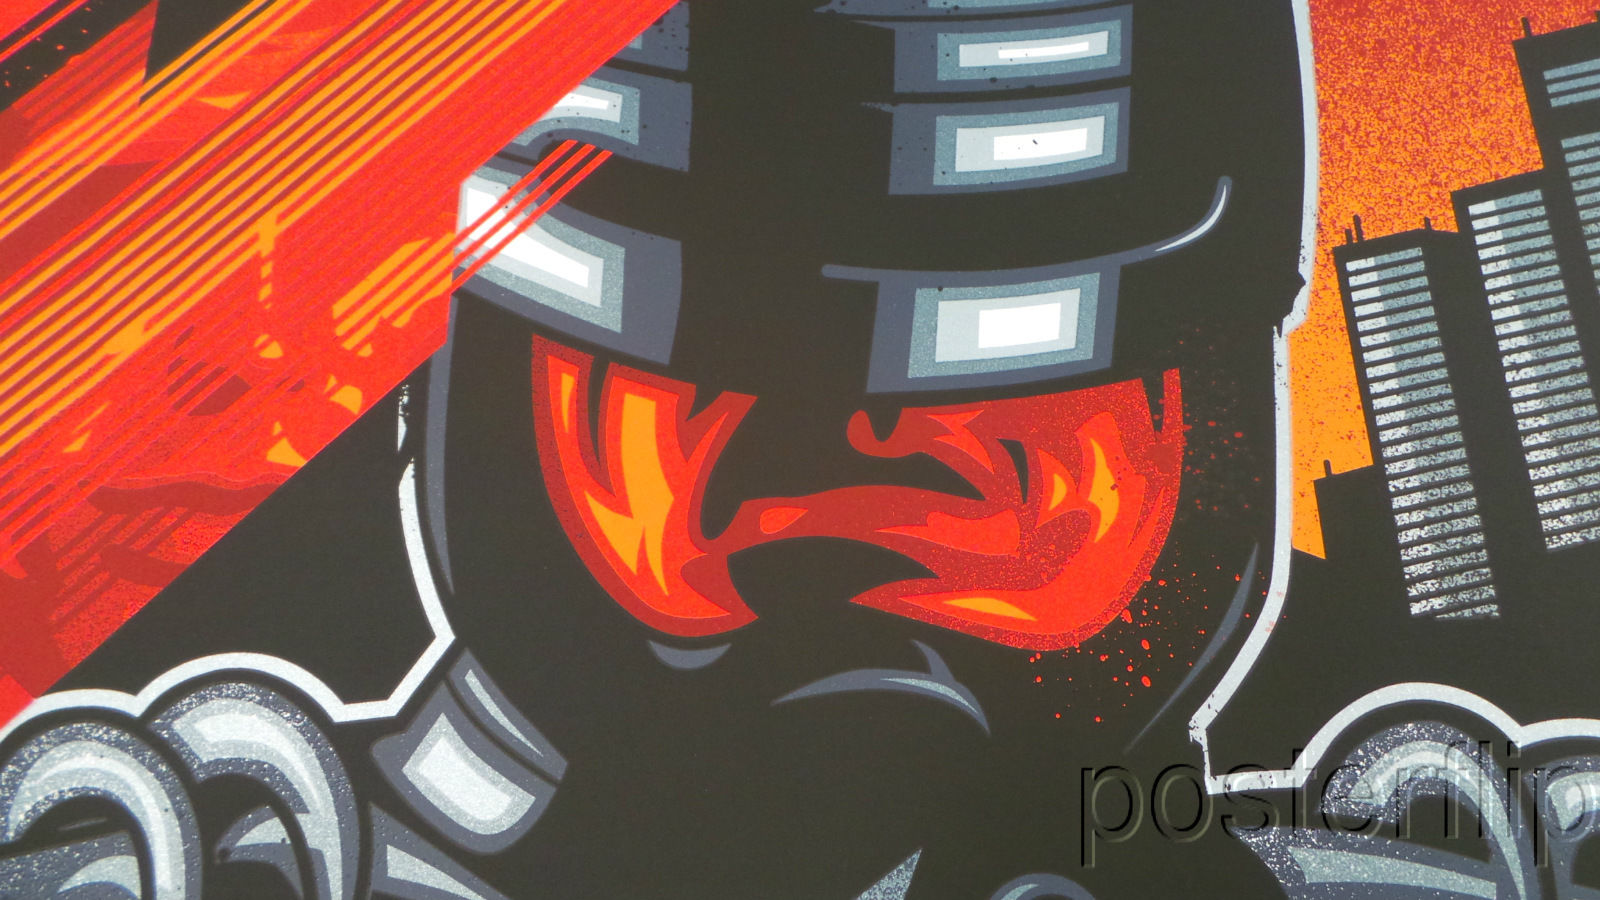 Title:  "Robocop"  Artist:  James White  Edition:  xx/165  Type:  Screen print poster  Size: 36" x 24"  Notes:  Released by Skuzzles in 2015, hand numbered.  Print is stored flat in very good condition. Following purchase, prints are rolled in archival paper and shipped with bubble wrap in sturdy cardboard tubes.  Check out our other listings for more hard-to-find and out-of-print posters.